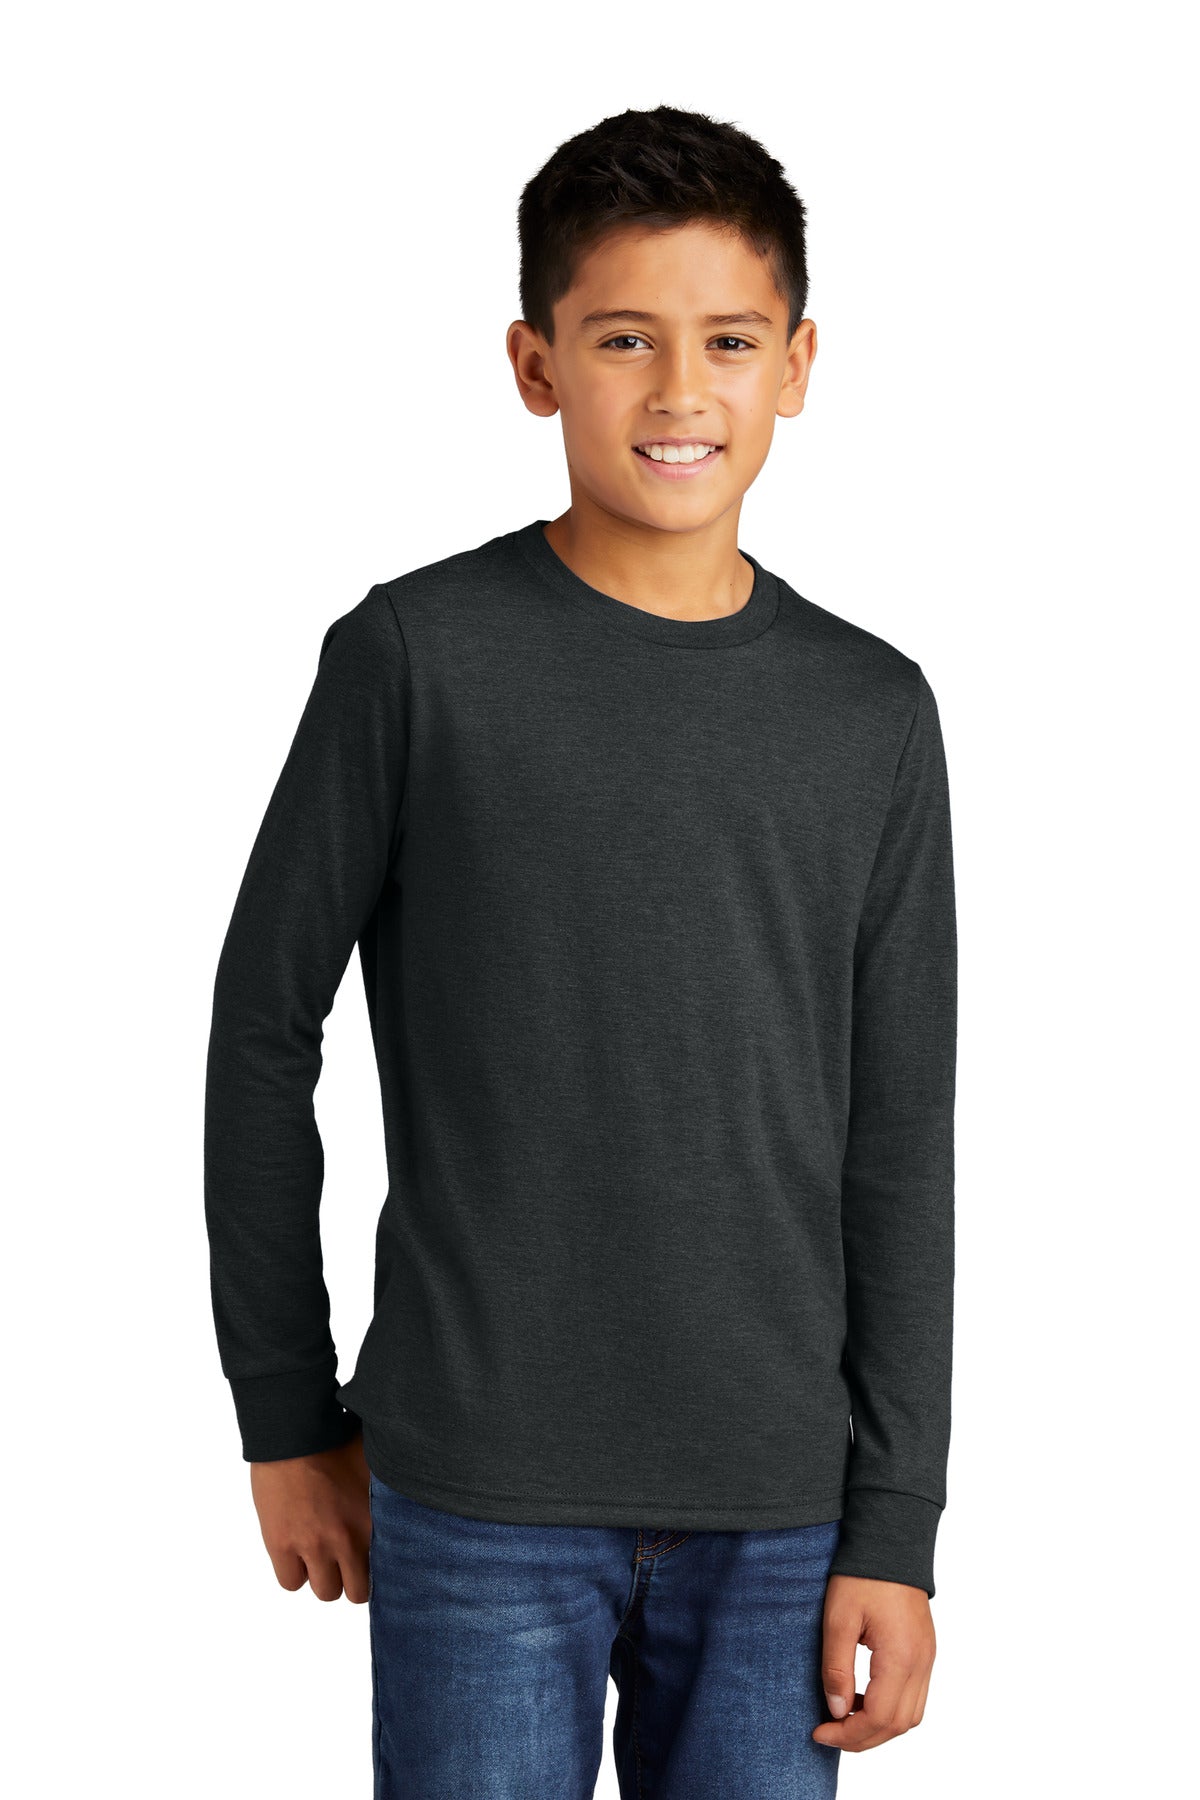 District® Youth Perfect Tri® Long Sleeve Tee DT132Y